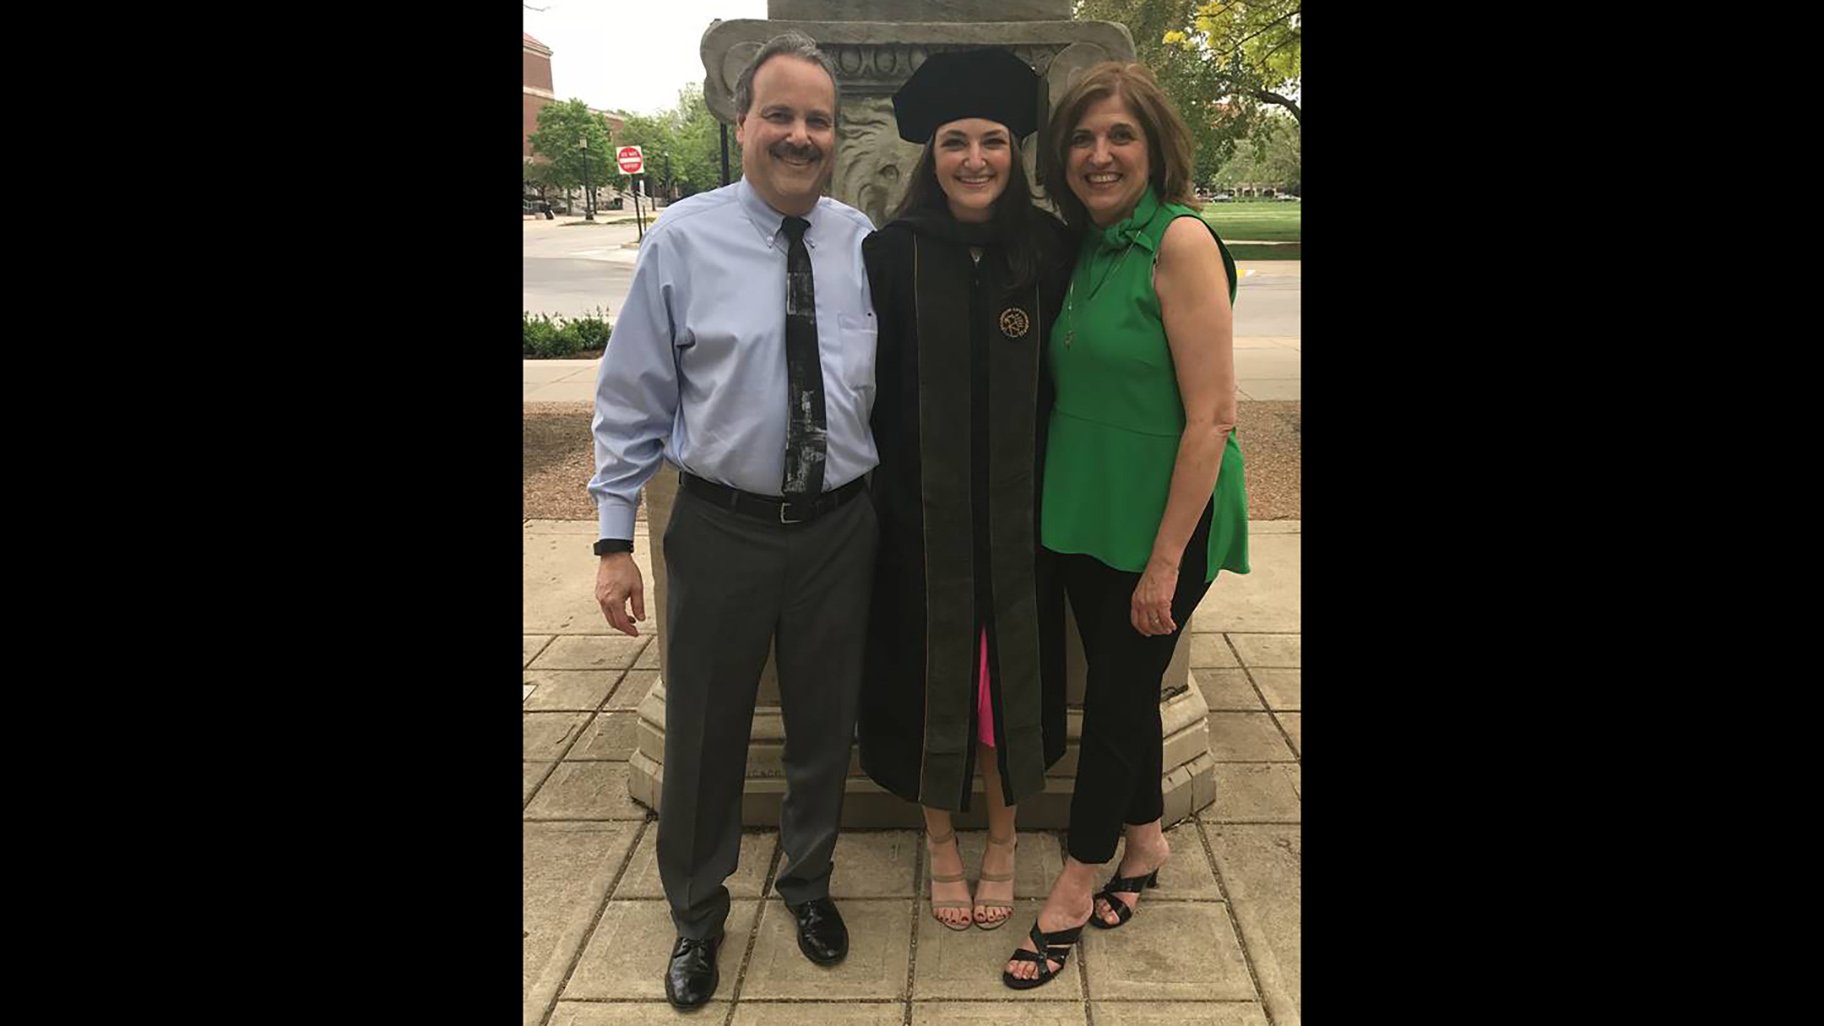 Dayna Less, center, with her father Brian and mother Teena. (Provided photo)